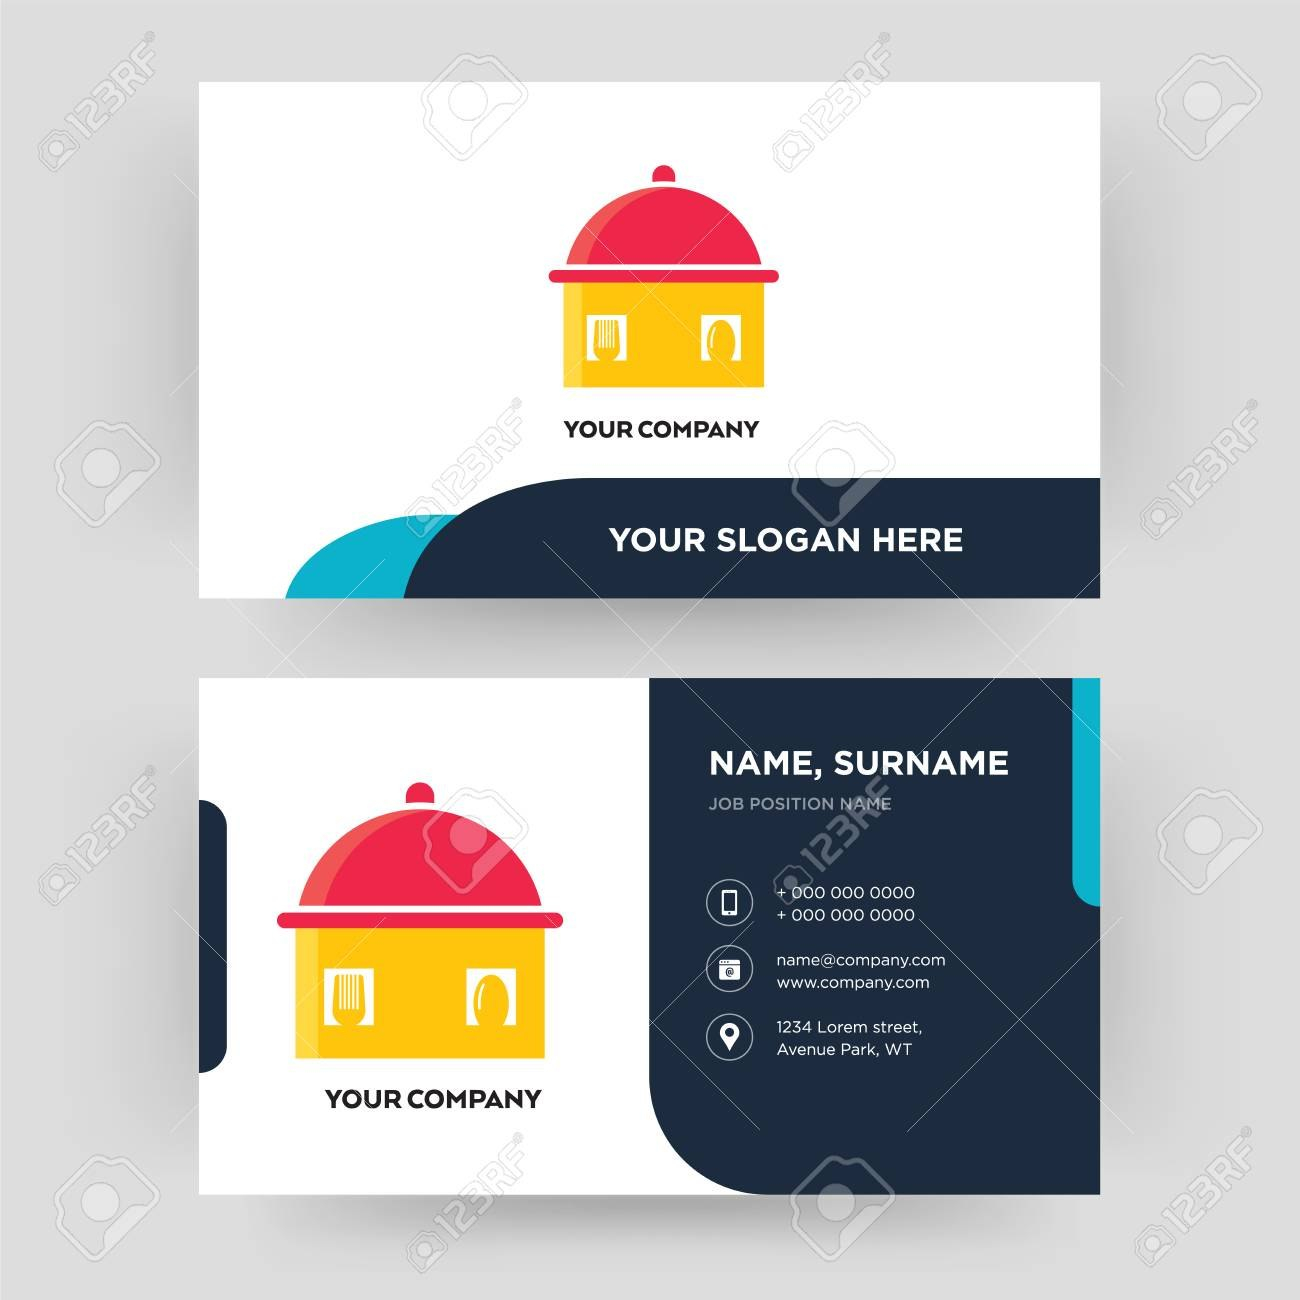 Homemade Food Business Card Design Template Visiting For Your with regard to Food Business Cards Templates Free